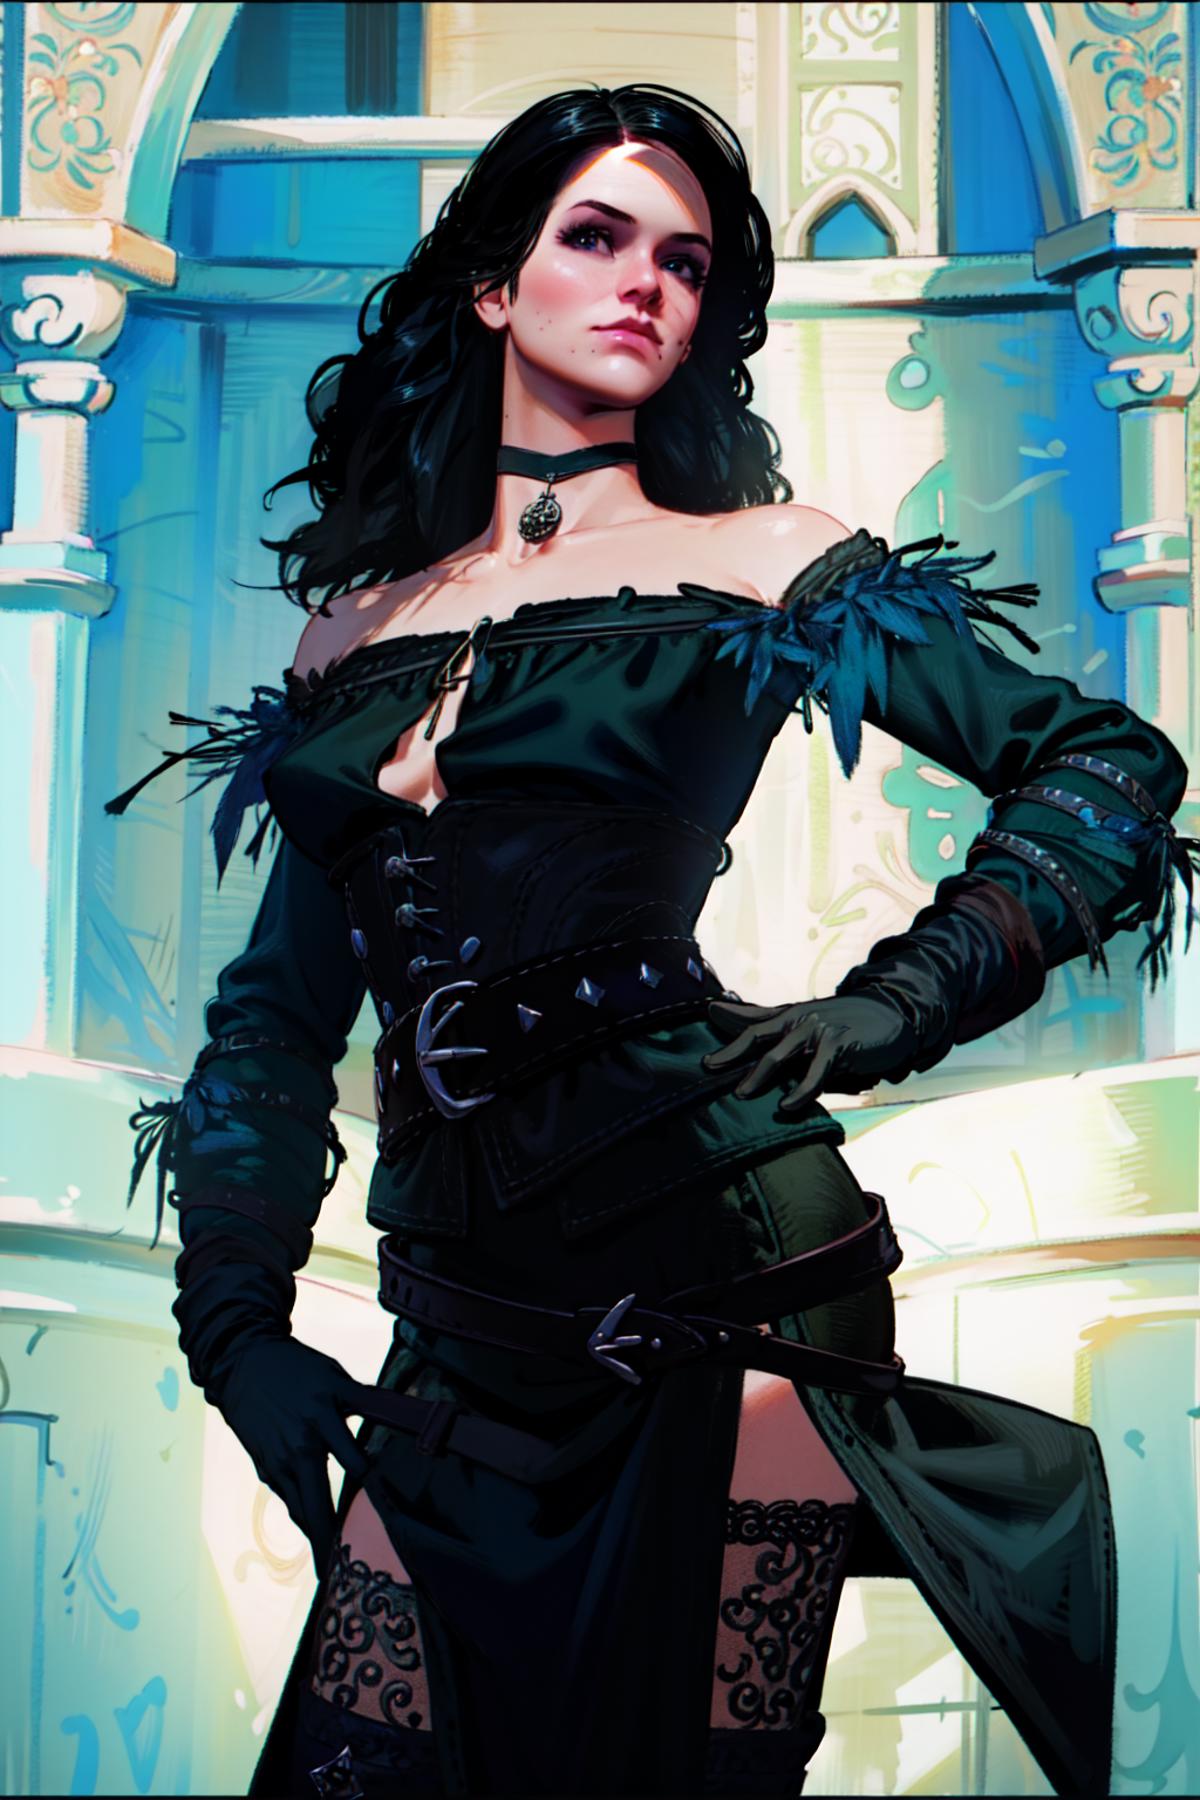 Yennefer of Vengerberg from Witcher 3 (LyCORIS) image by BoomAi